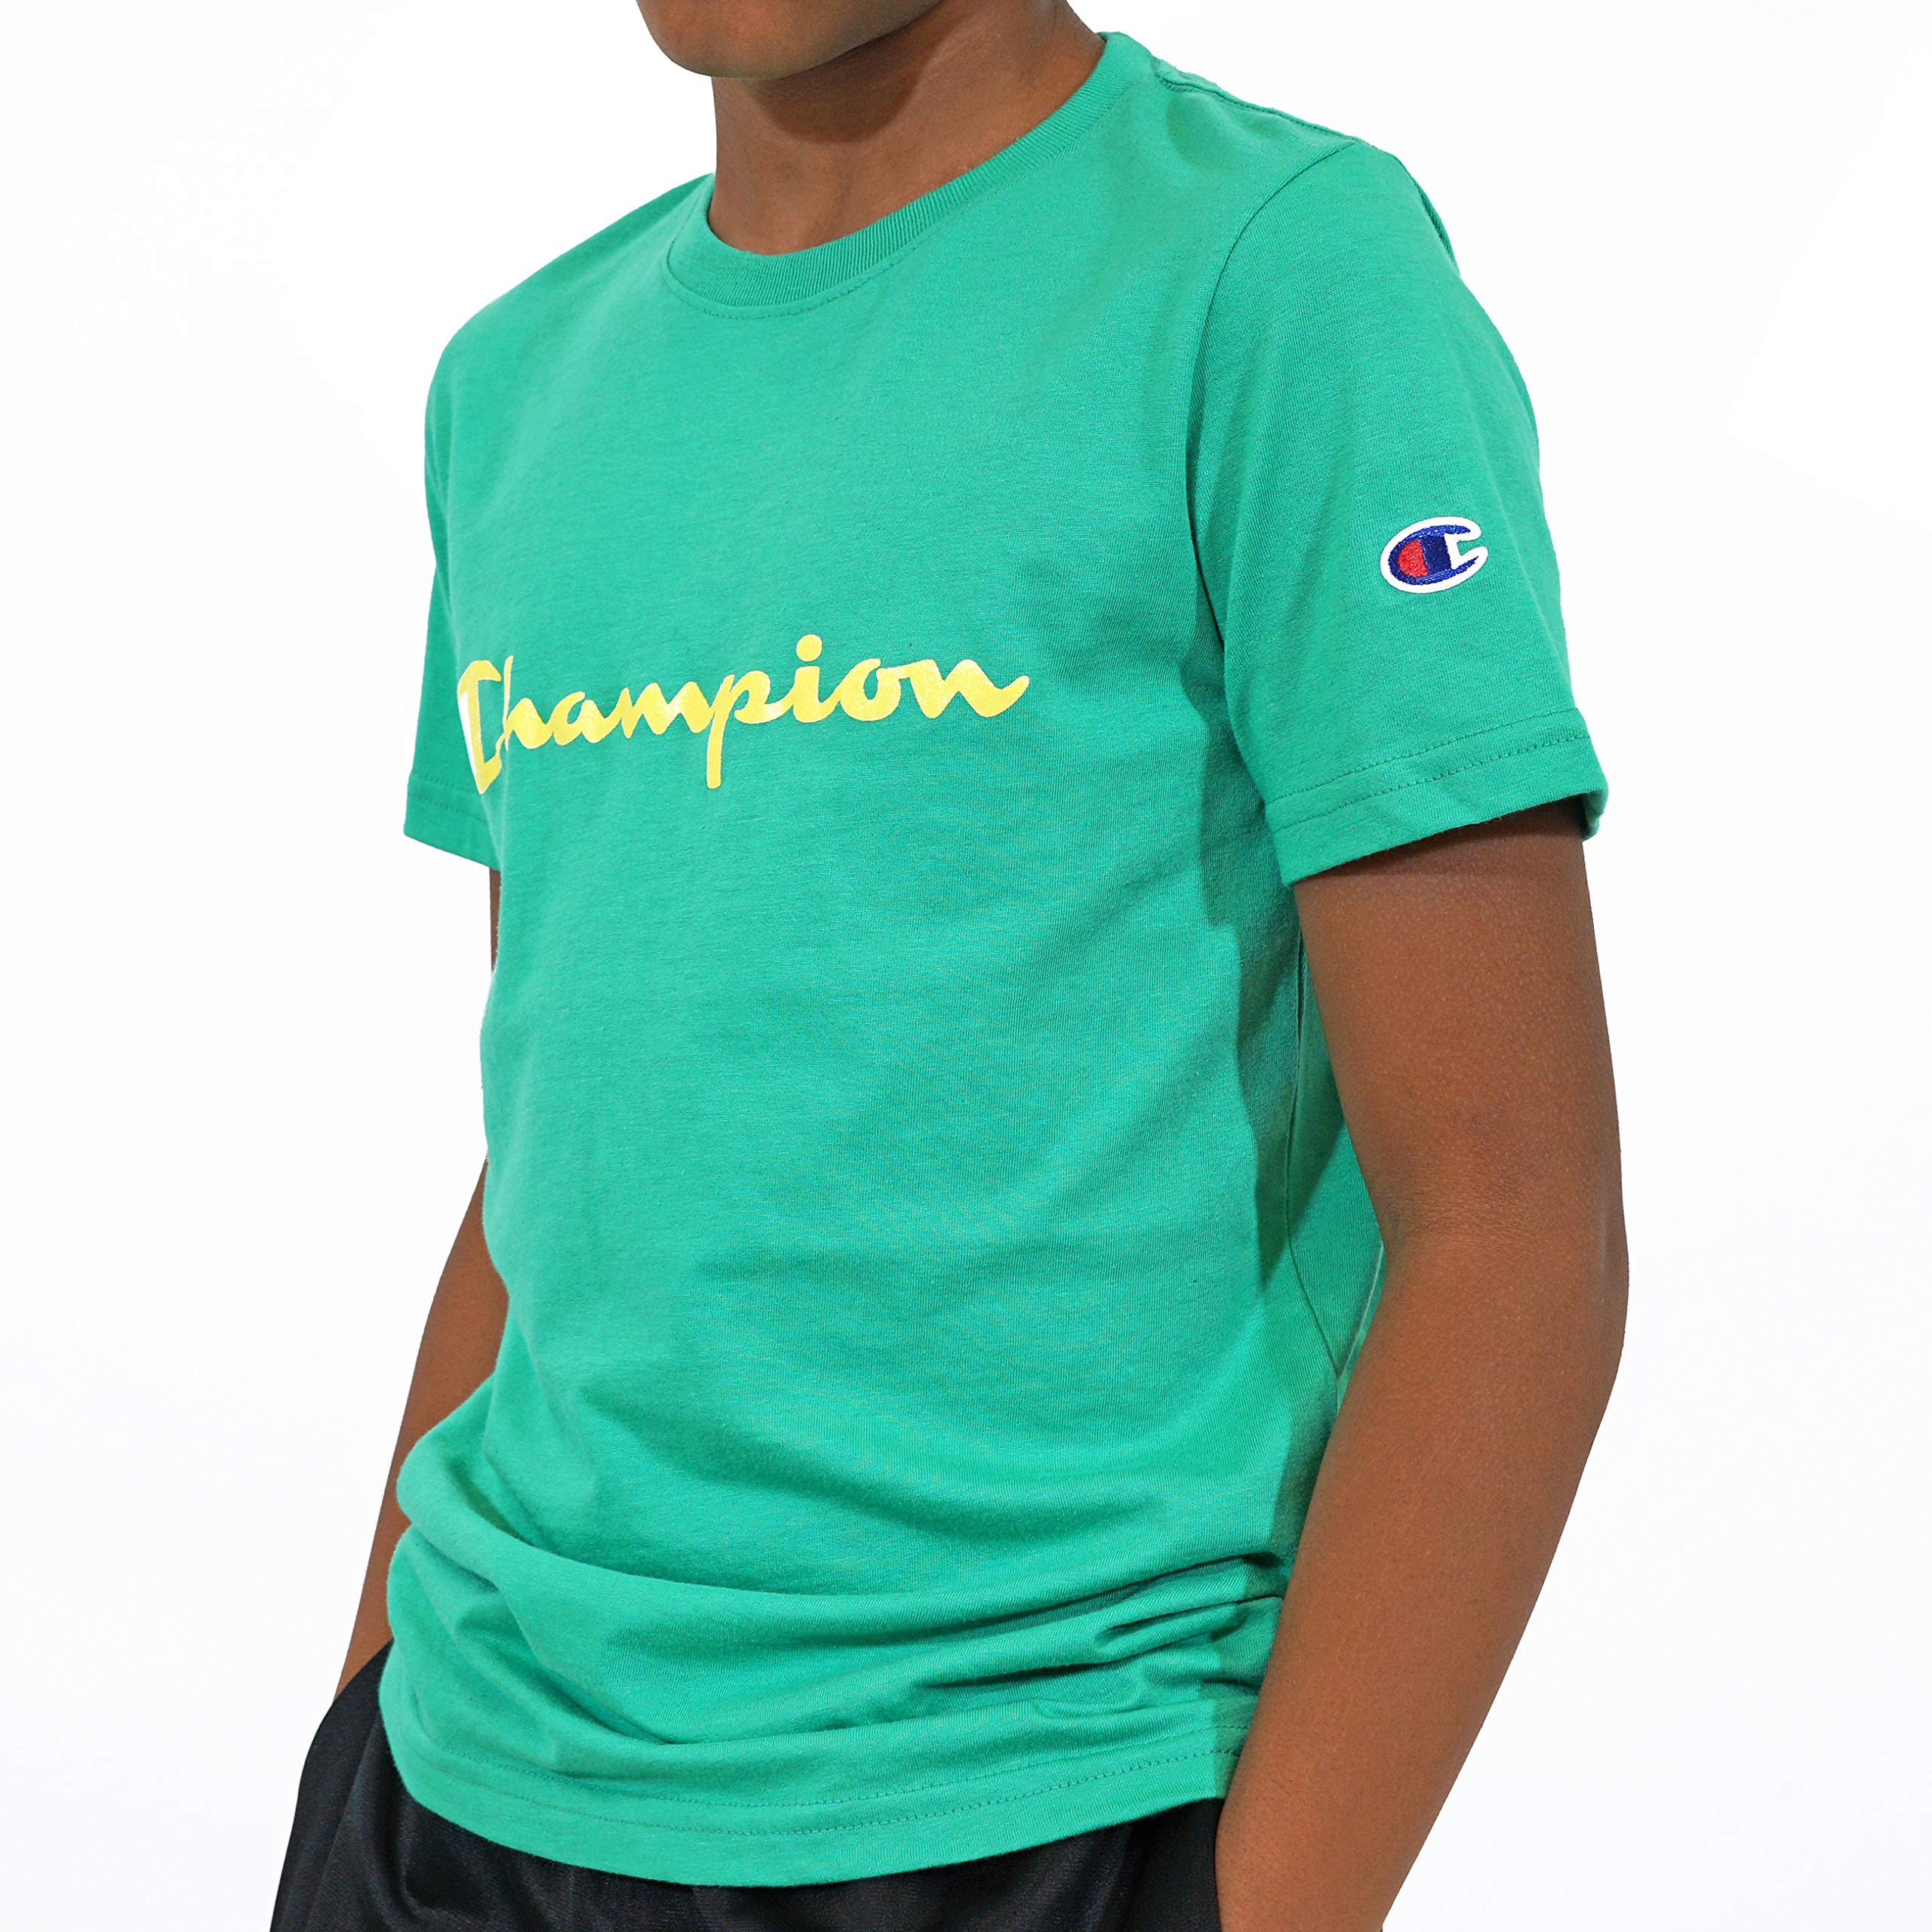 Champion Heritage Short Sleeve Cotton Logo Boys Active Shirts & Tees Size S, Color: Heritage White - image 4 of 7